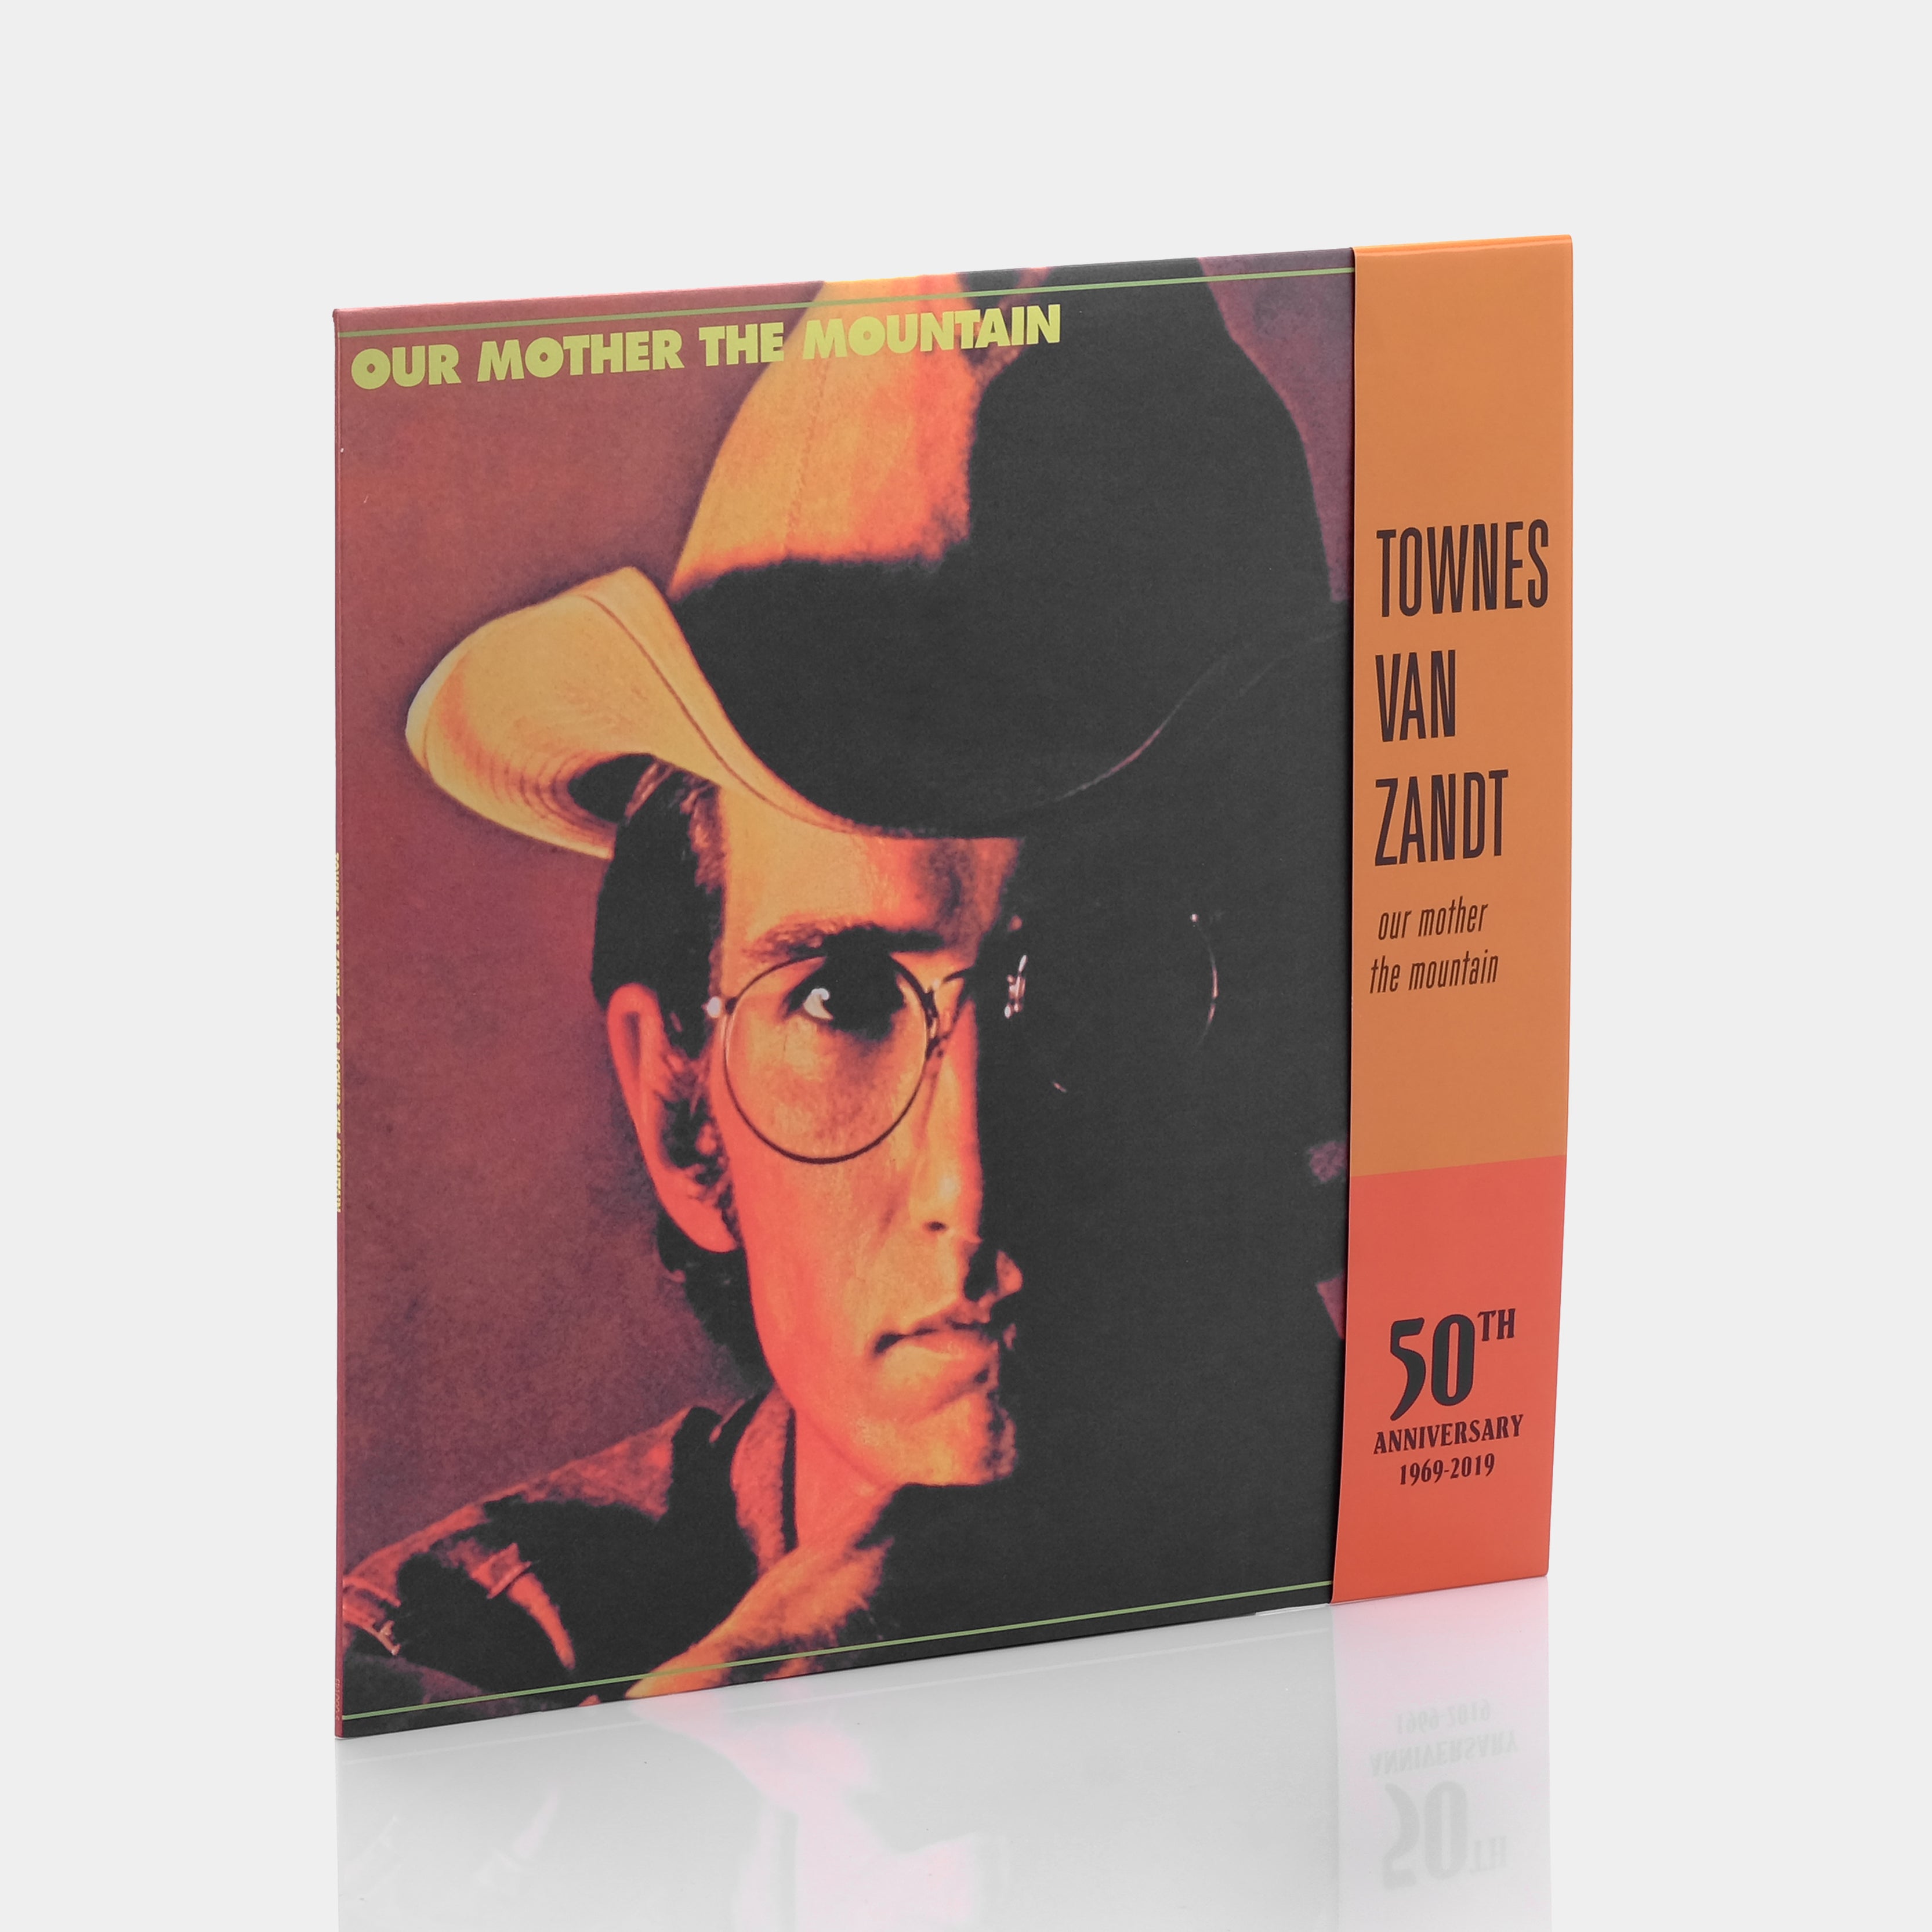 Townes Van Zandt - Our Mother The Mountain (50th Anniversary Edition) LP Vinyl Record